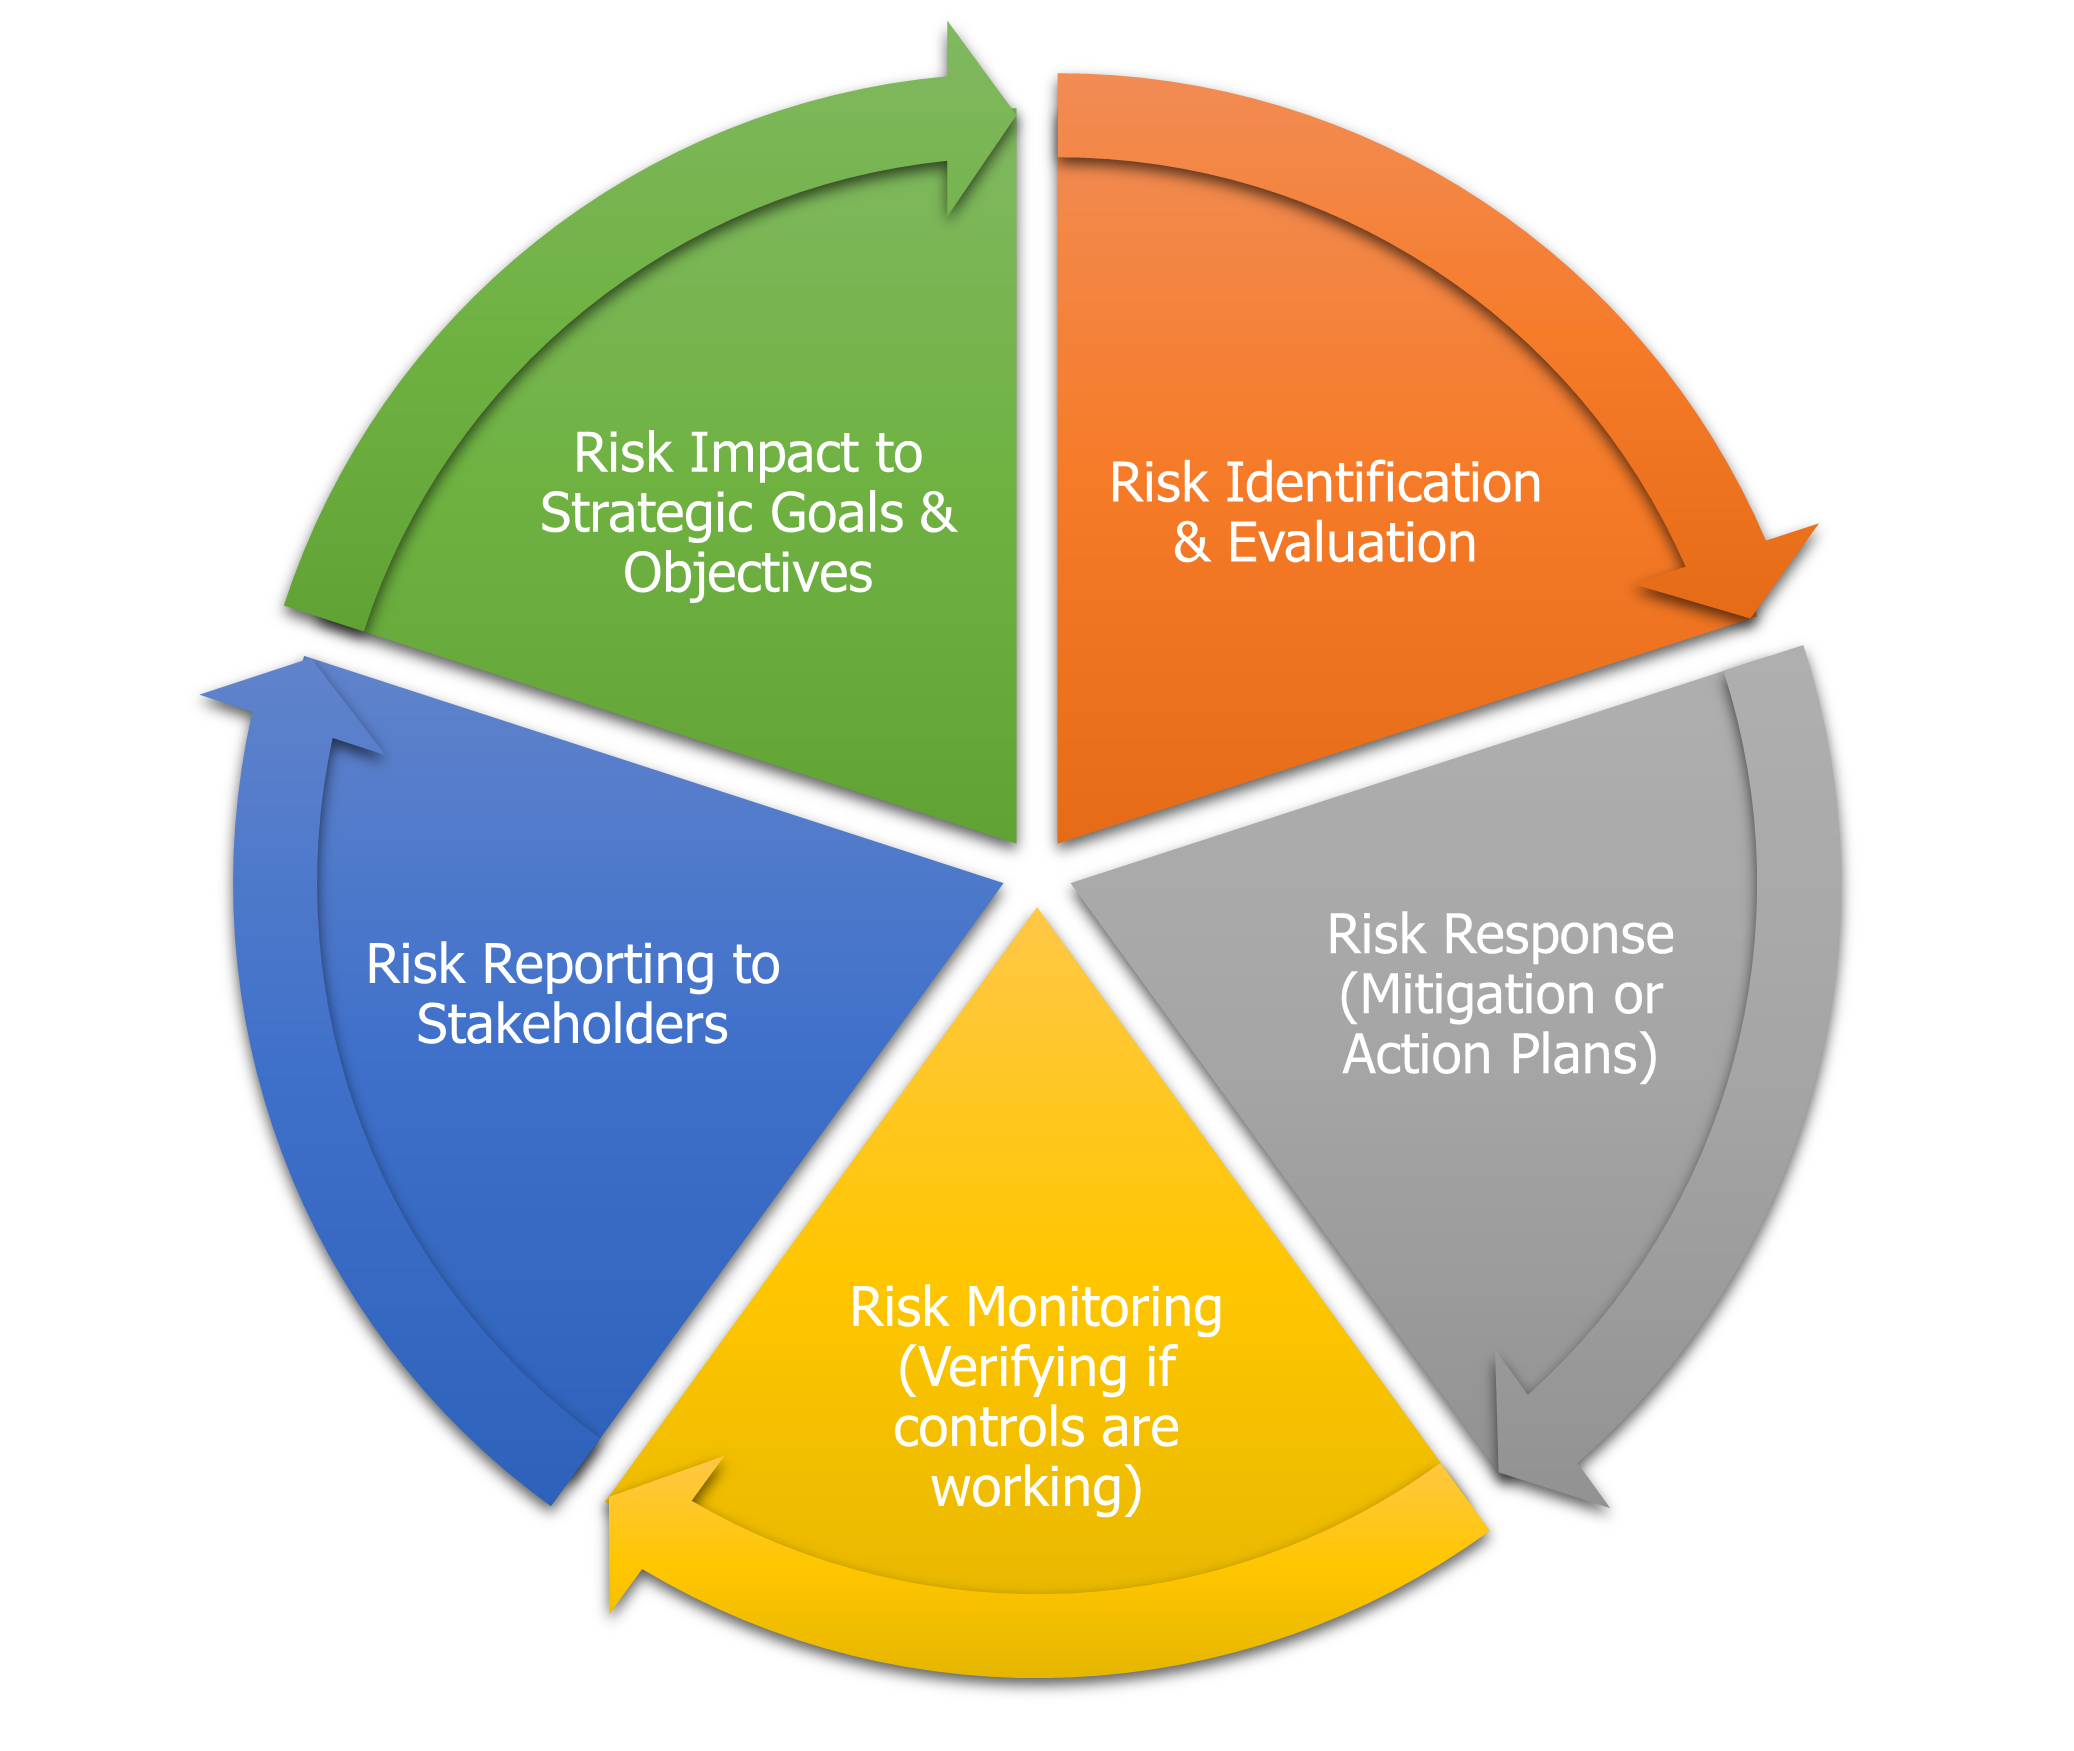 Segmented Cycle smart art from top left Risk Impact to Strategic Goals & Objectives, Risk Identification & Evaluation, Risk Response (Mitigation or Action Plans), Risk Monitoring (Verifying if controls are working), Risk Reporting to Stakeholders.